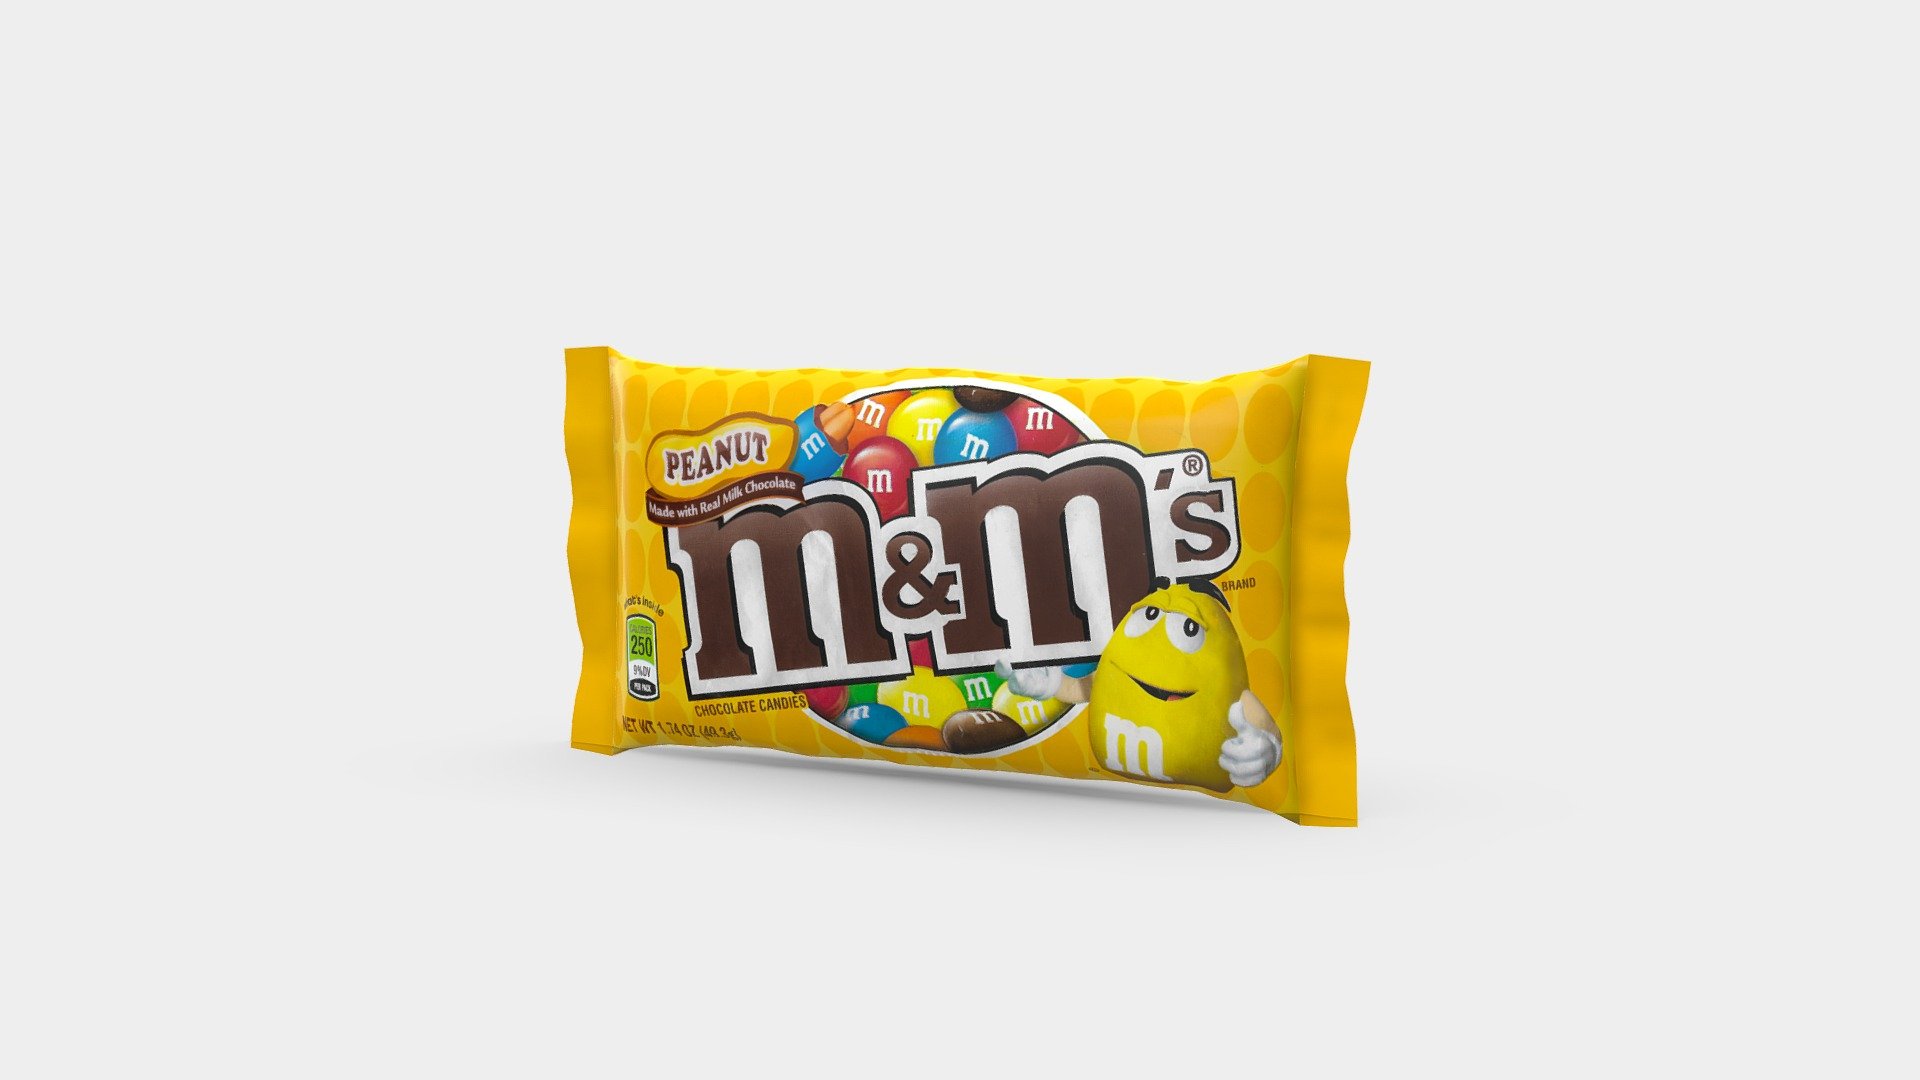 M&amp;M's - Peanut MM's
VR and game ready for high quality Architectural Visualization
EAN: 0000004003207 - M&M's - 3D model by Invrsion 3d model